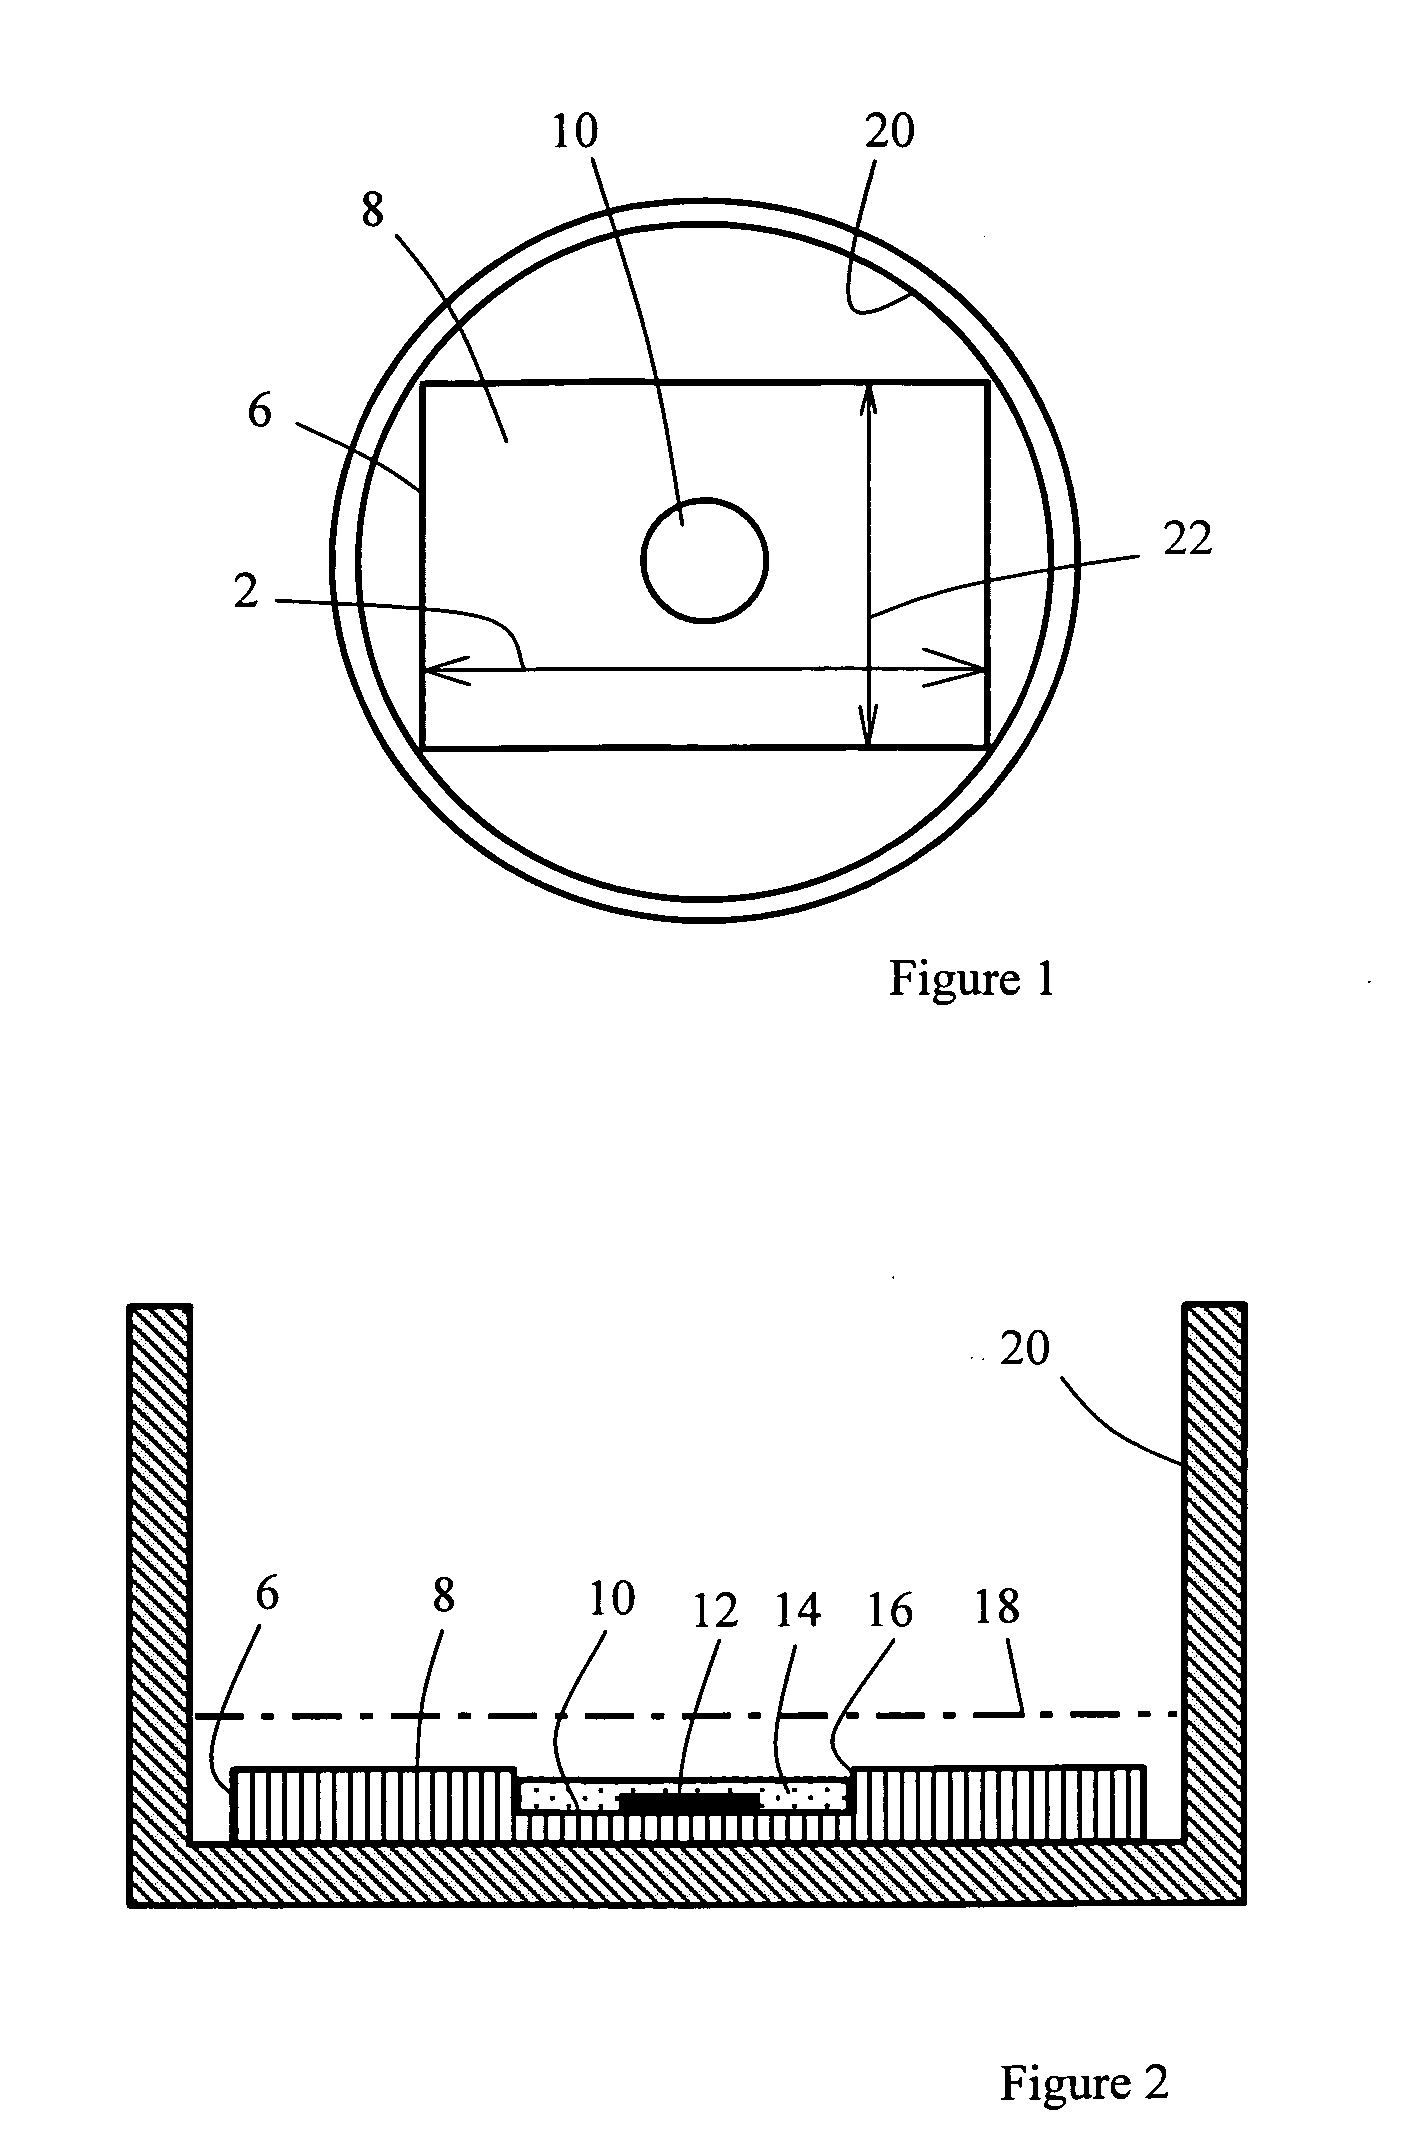 Insert with concavity for organic culture and imaging